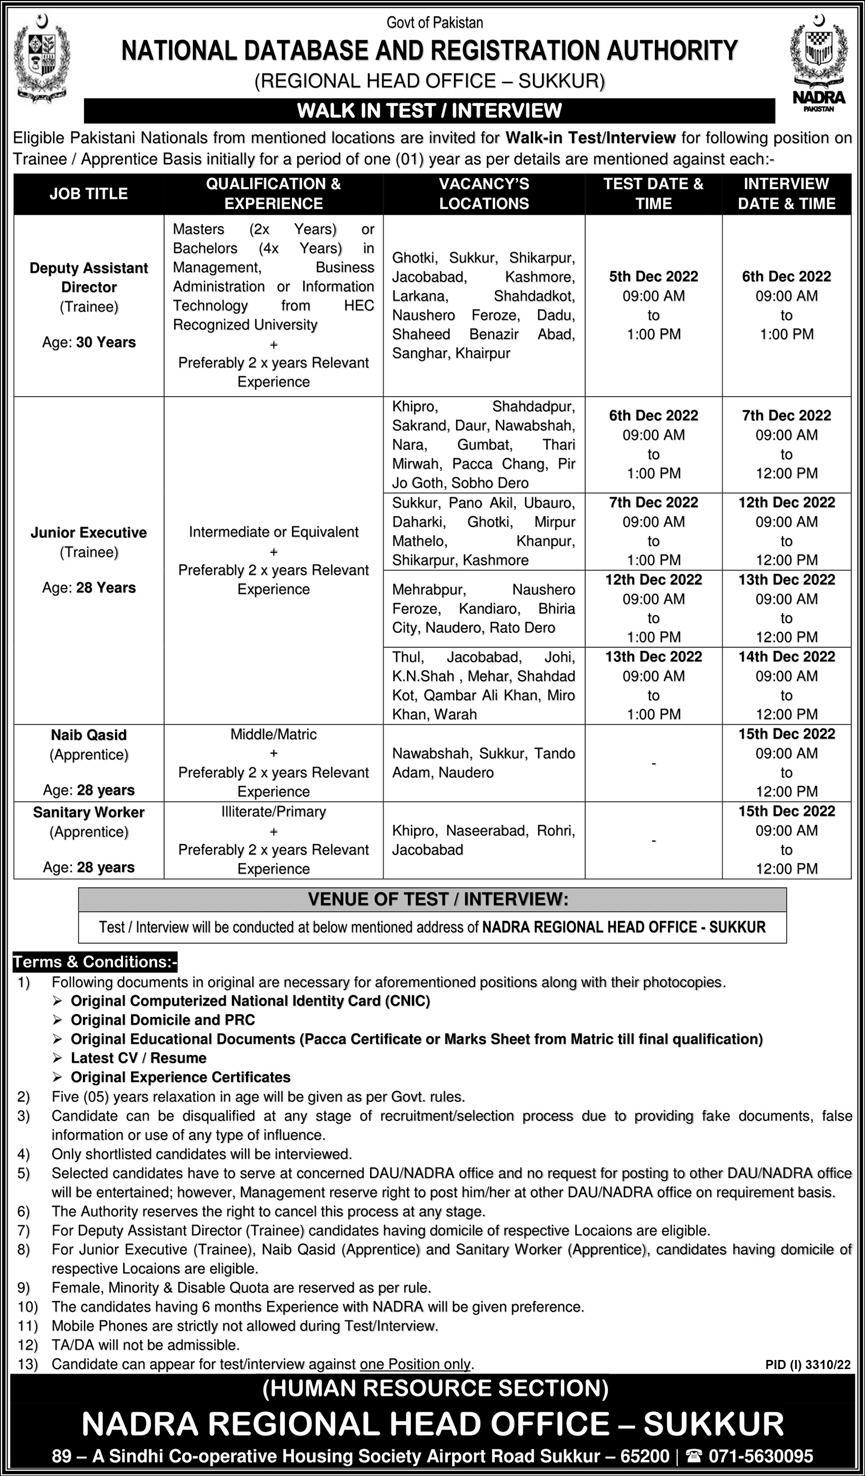 NADRA National Database and Registration Authority Jobs Sindh 2022